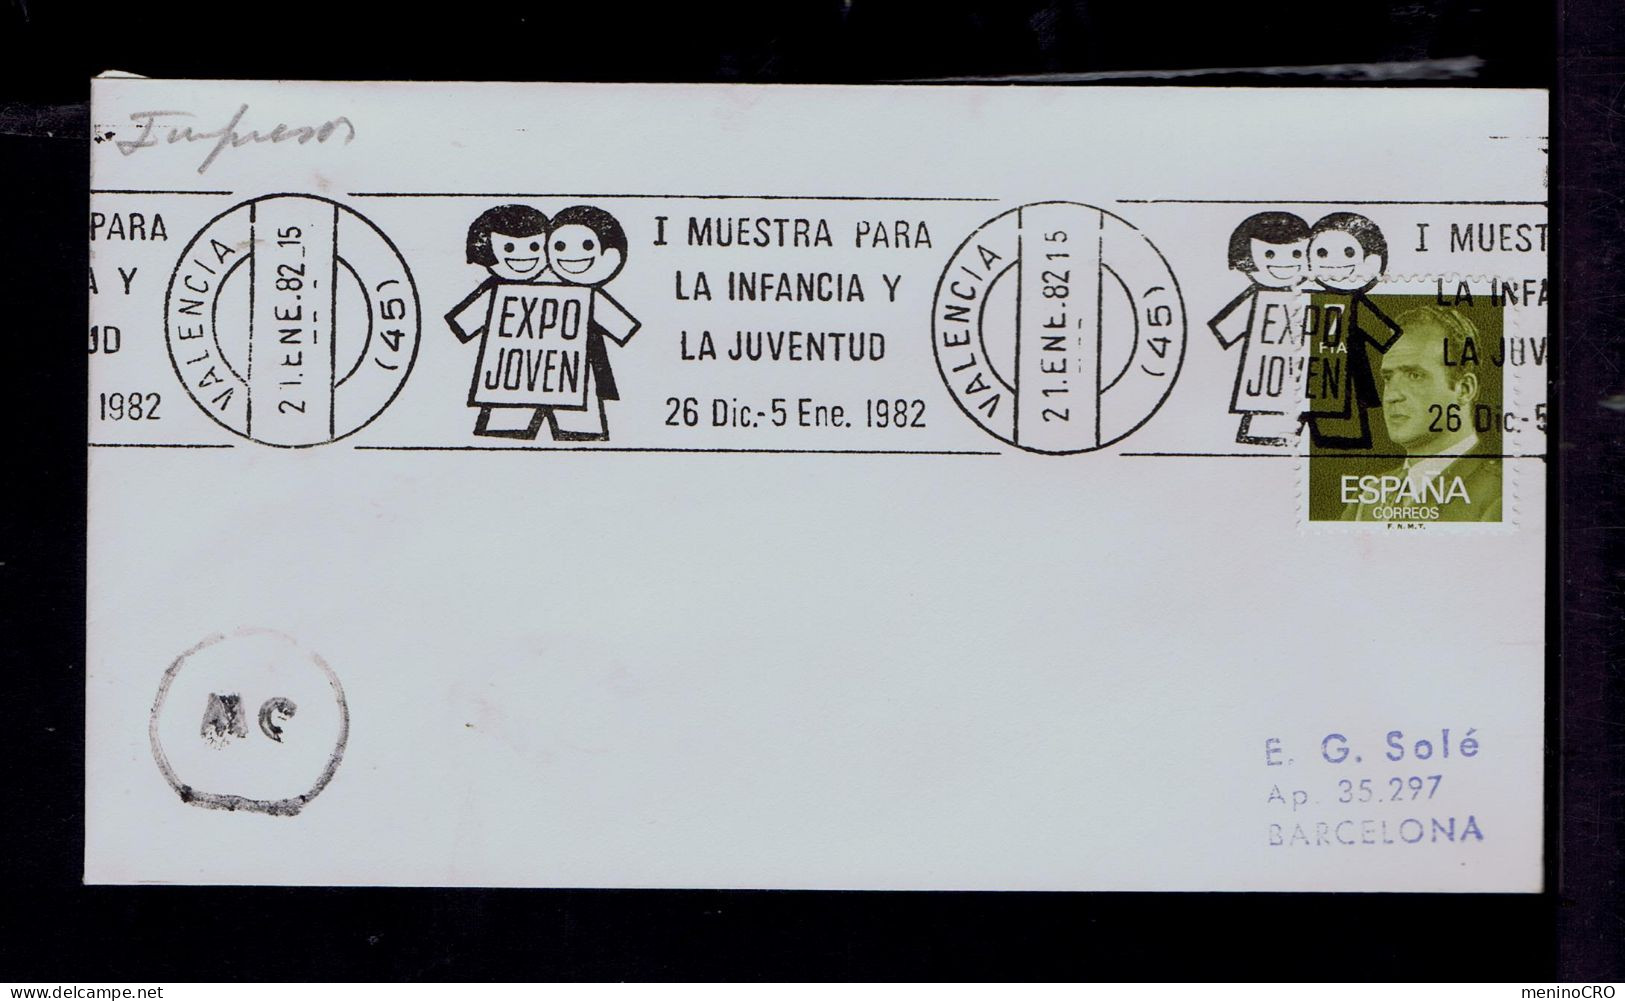 Gc8393 SPAIN Expo Younth Enfance Younth Slogan Pmk Mailed - Fairy Tales, Popular Stories & Legends